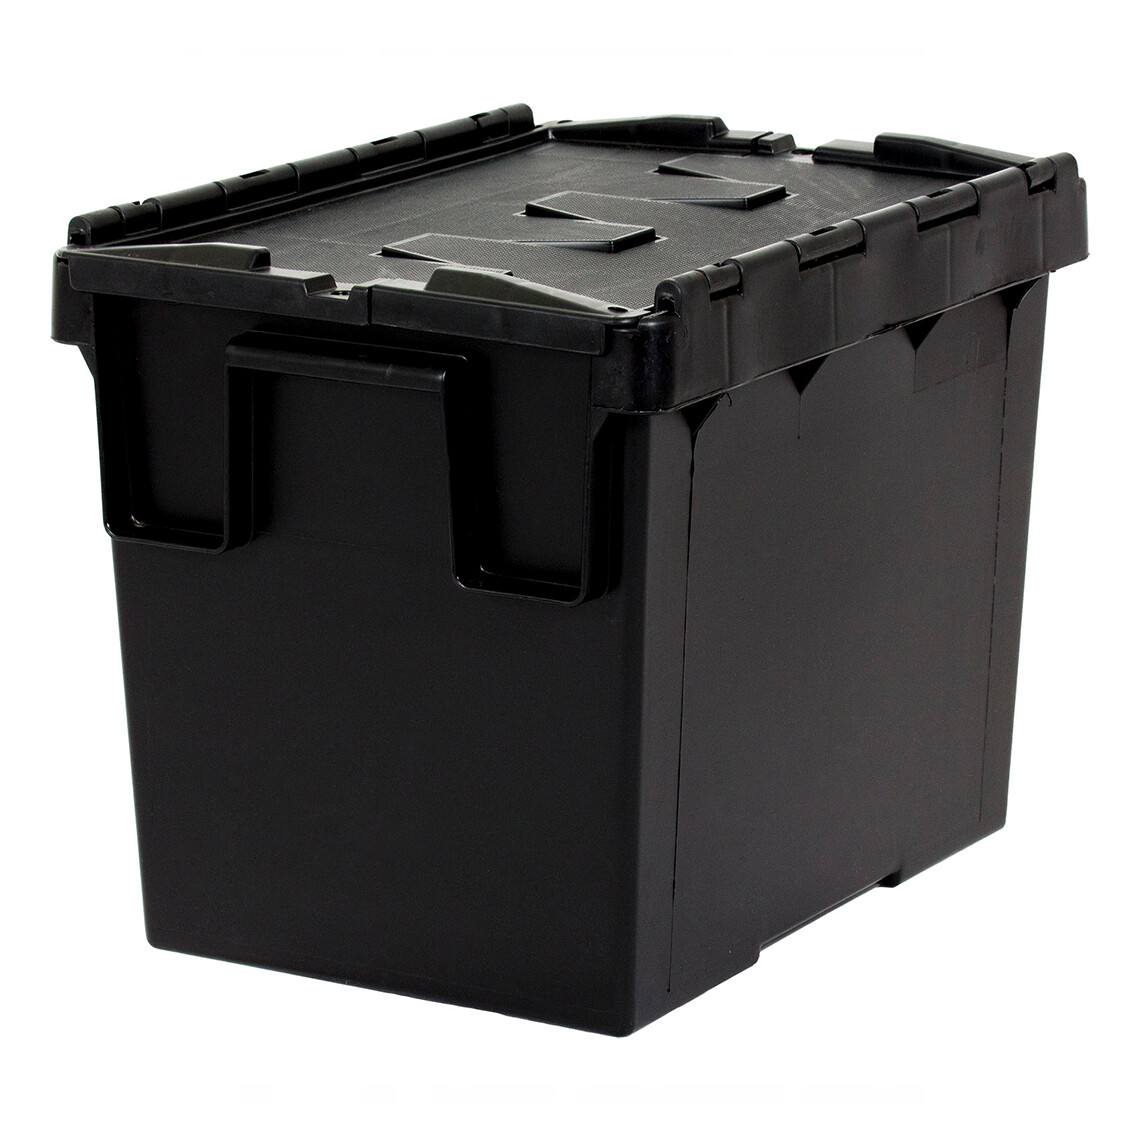 SECURITY CONTAINER BLACK 594 X 396 X 315MM